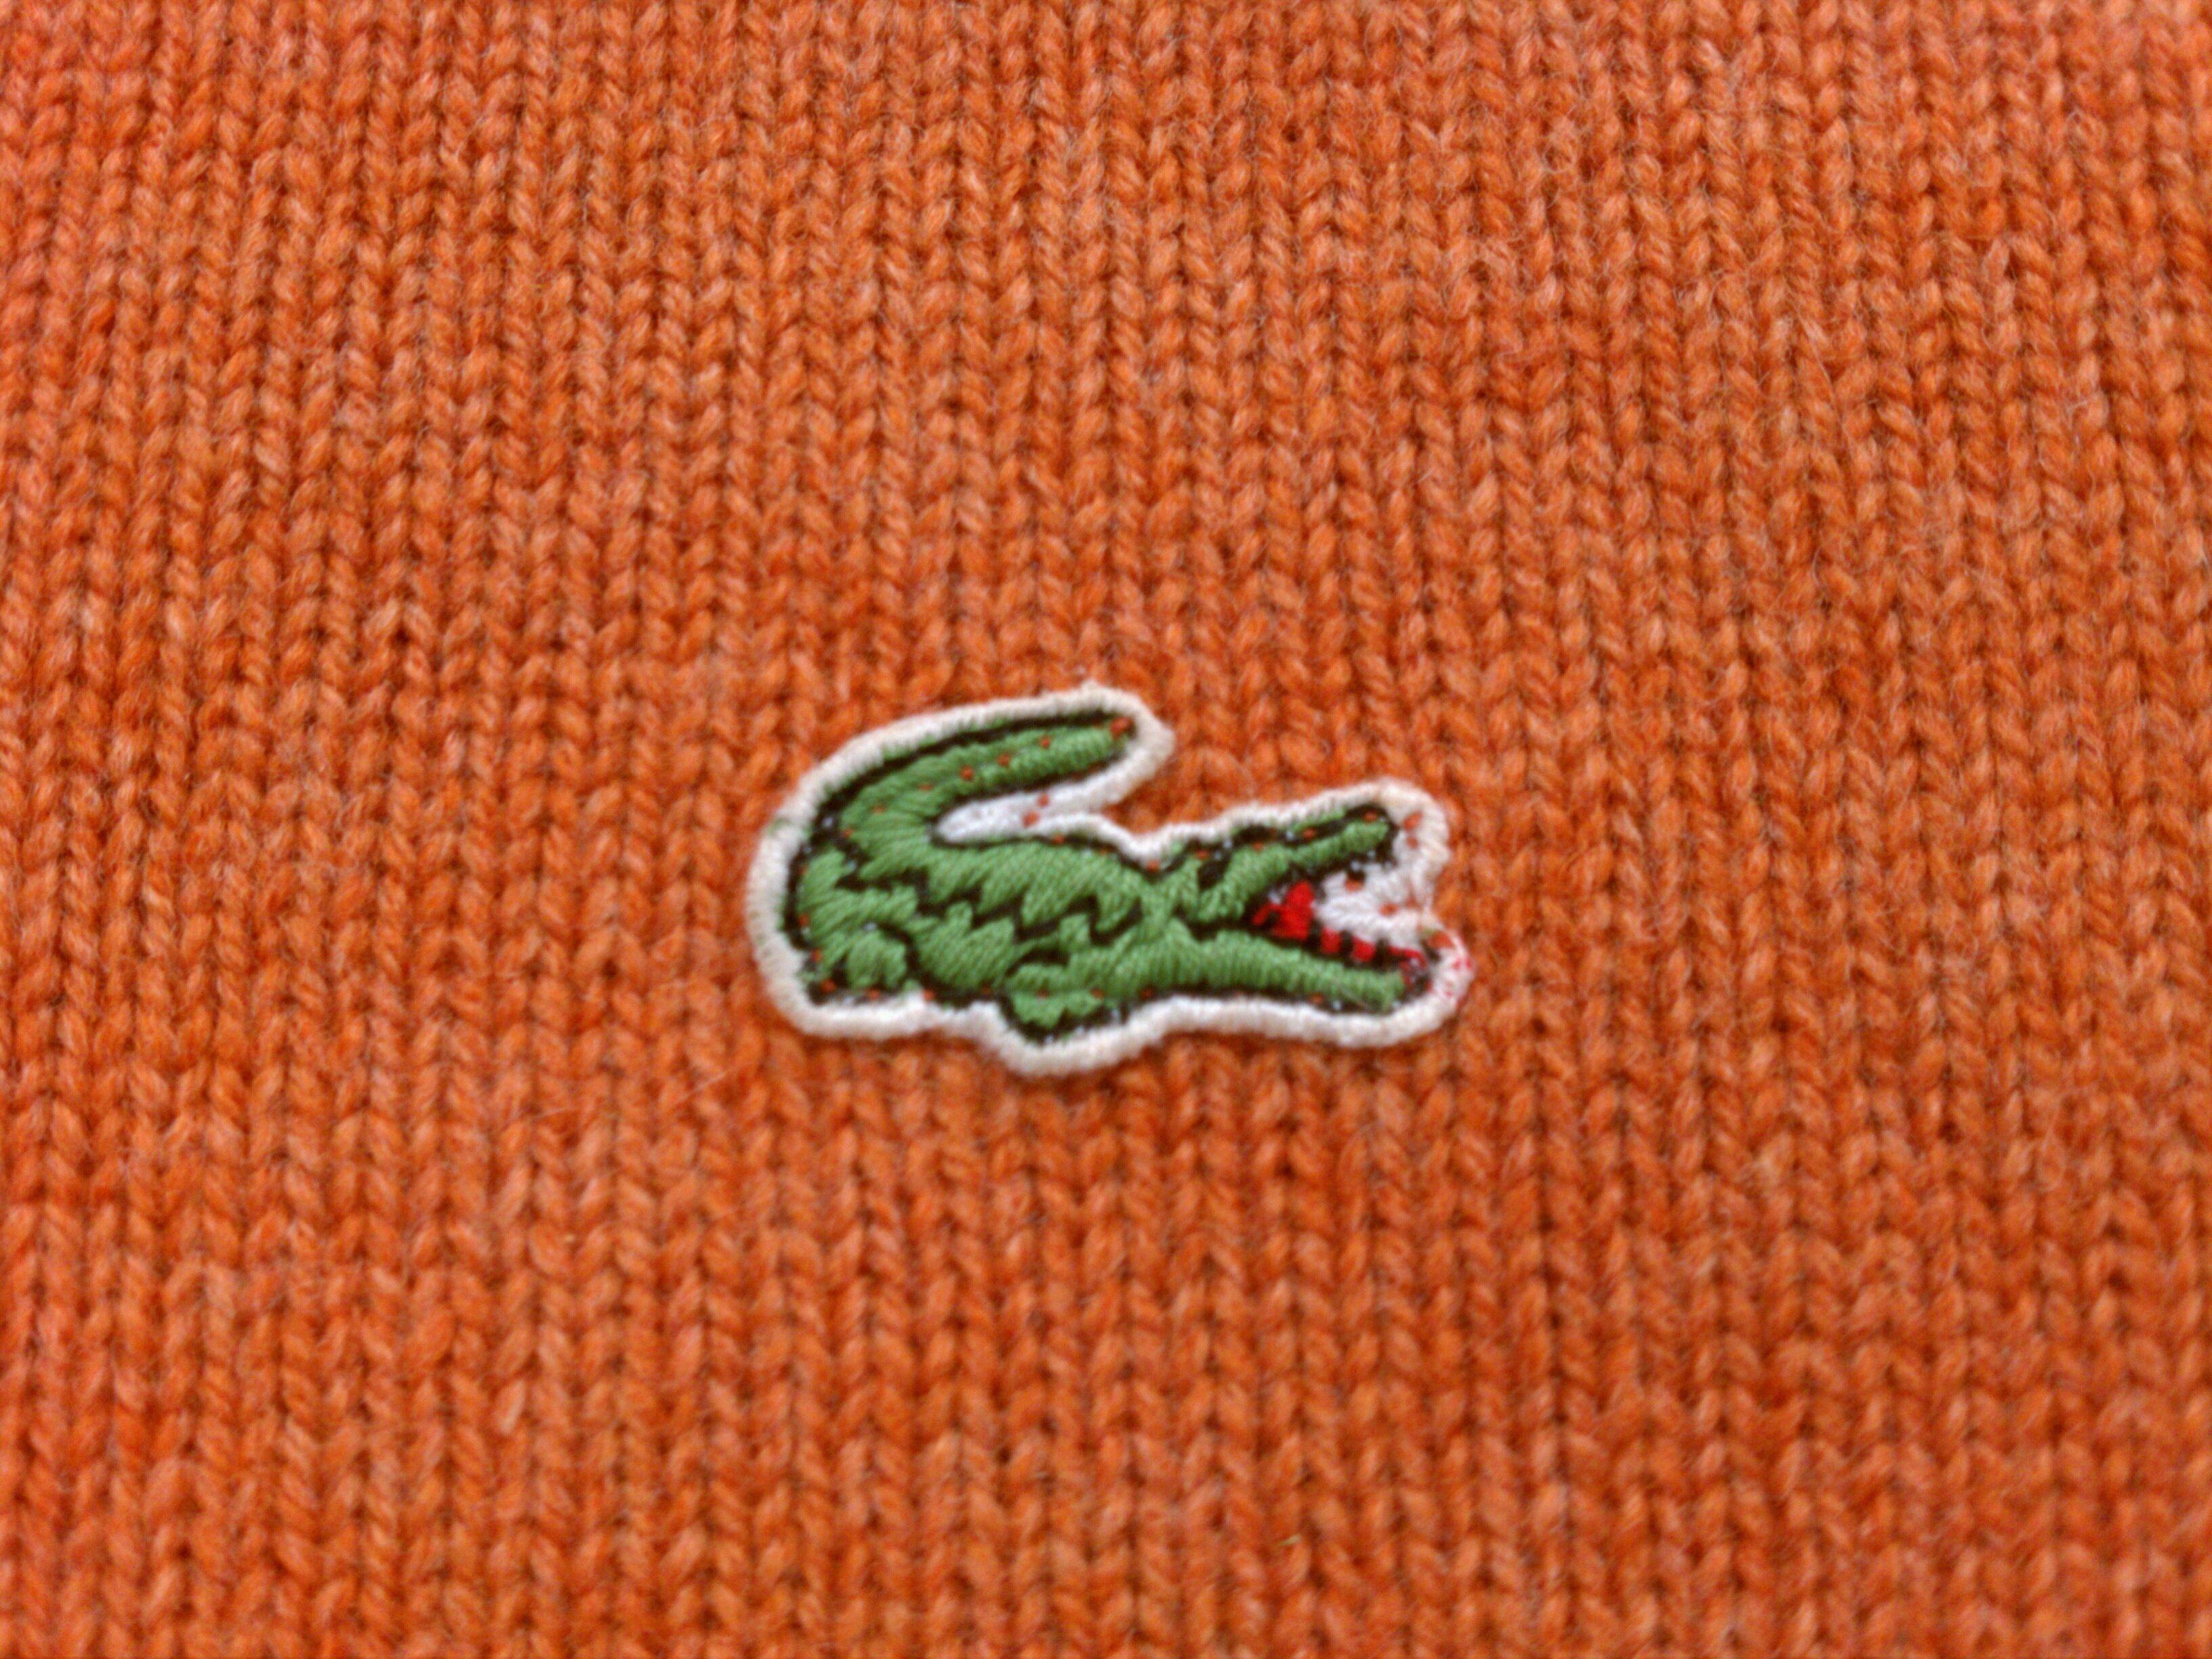 What Company Has Alligator Logo - Of A Crocodile In The Wrong Place | Thrift Store Preppy